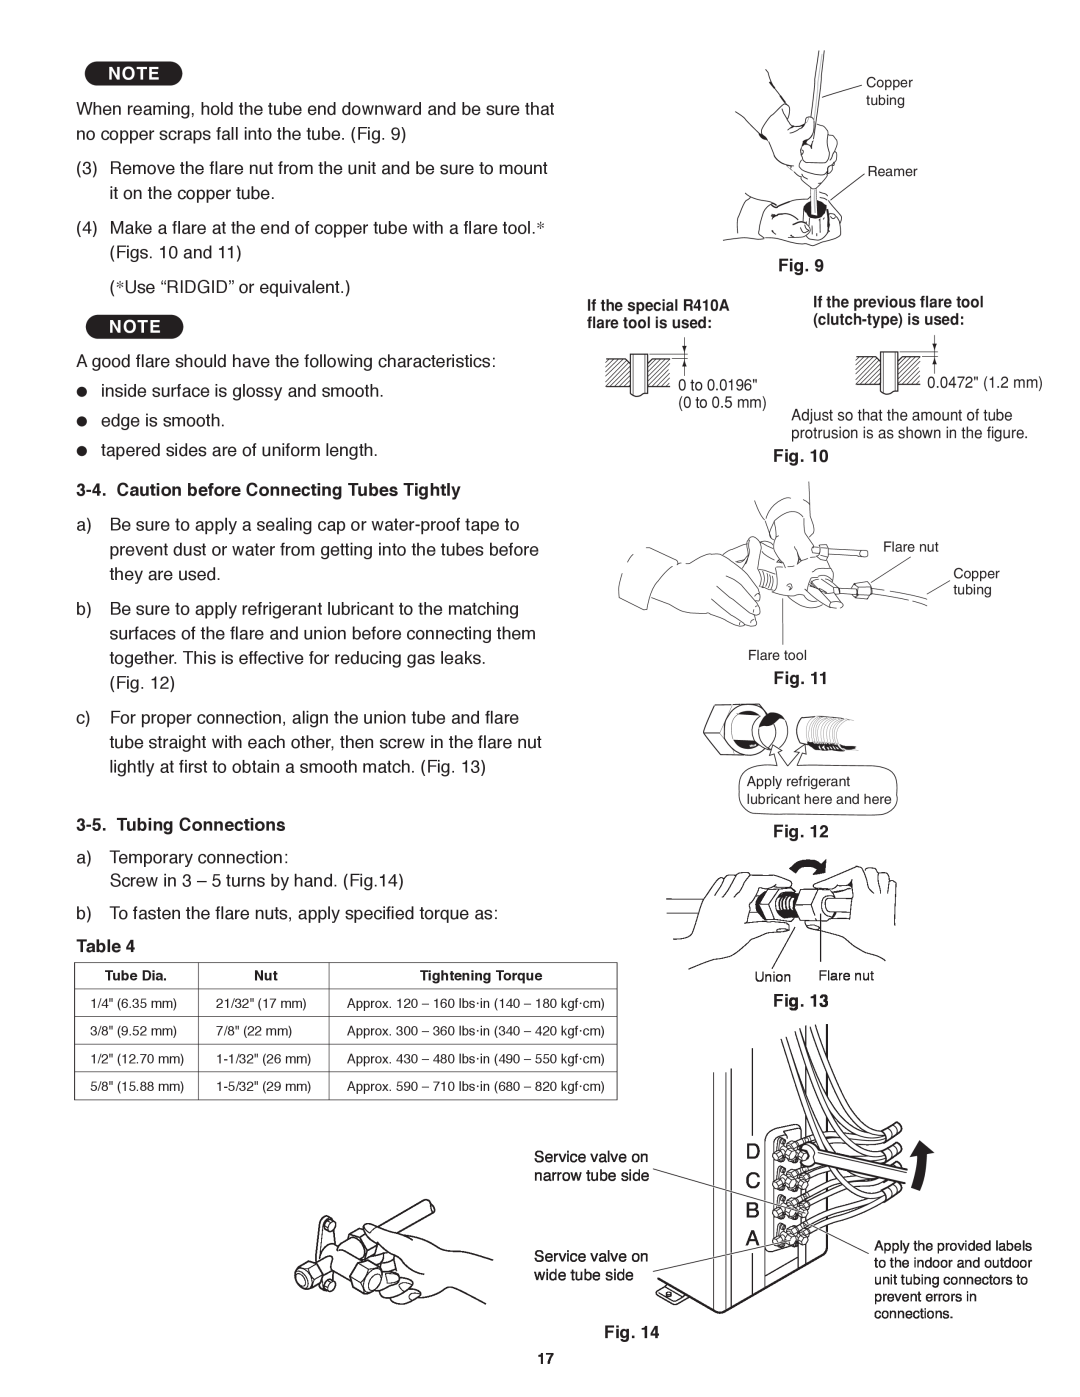 Panasonic CU-4KS31NBU service manual D C B, Caution before Connecting Tubes Tightly, Fig, Tubing Connections 